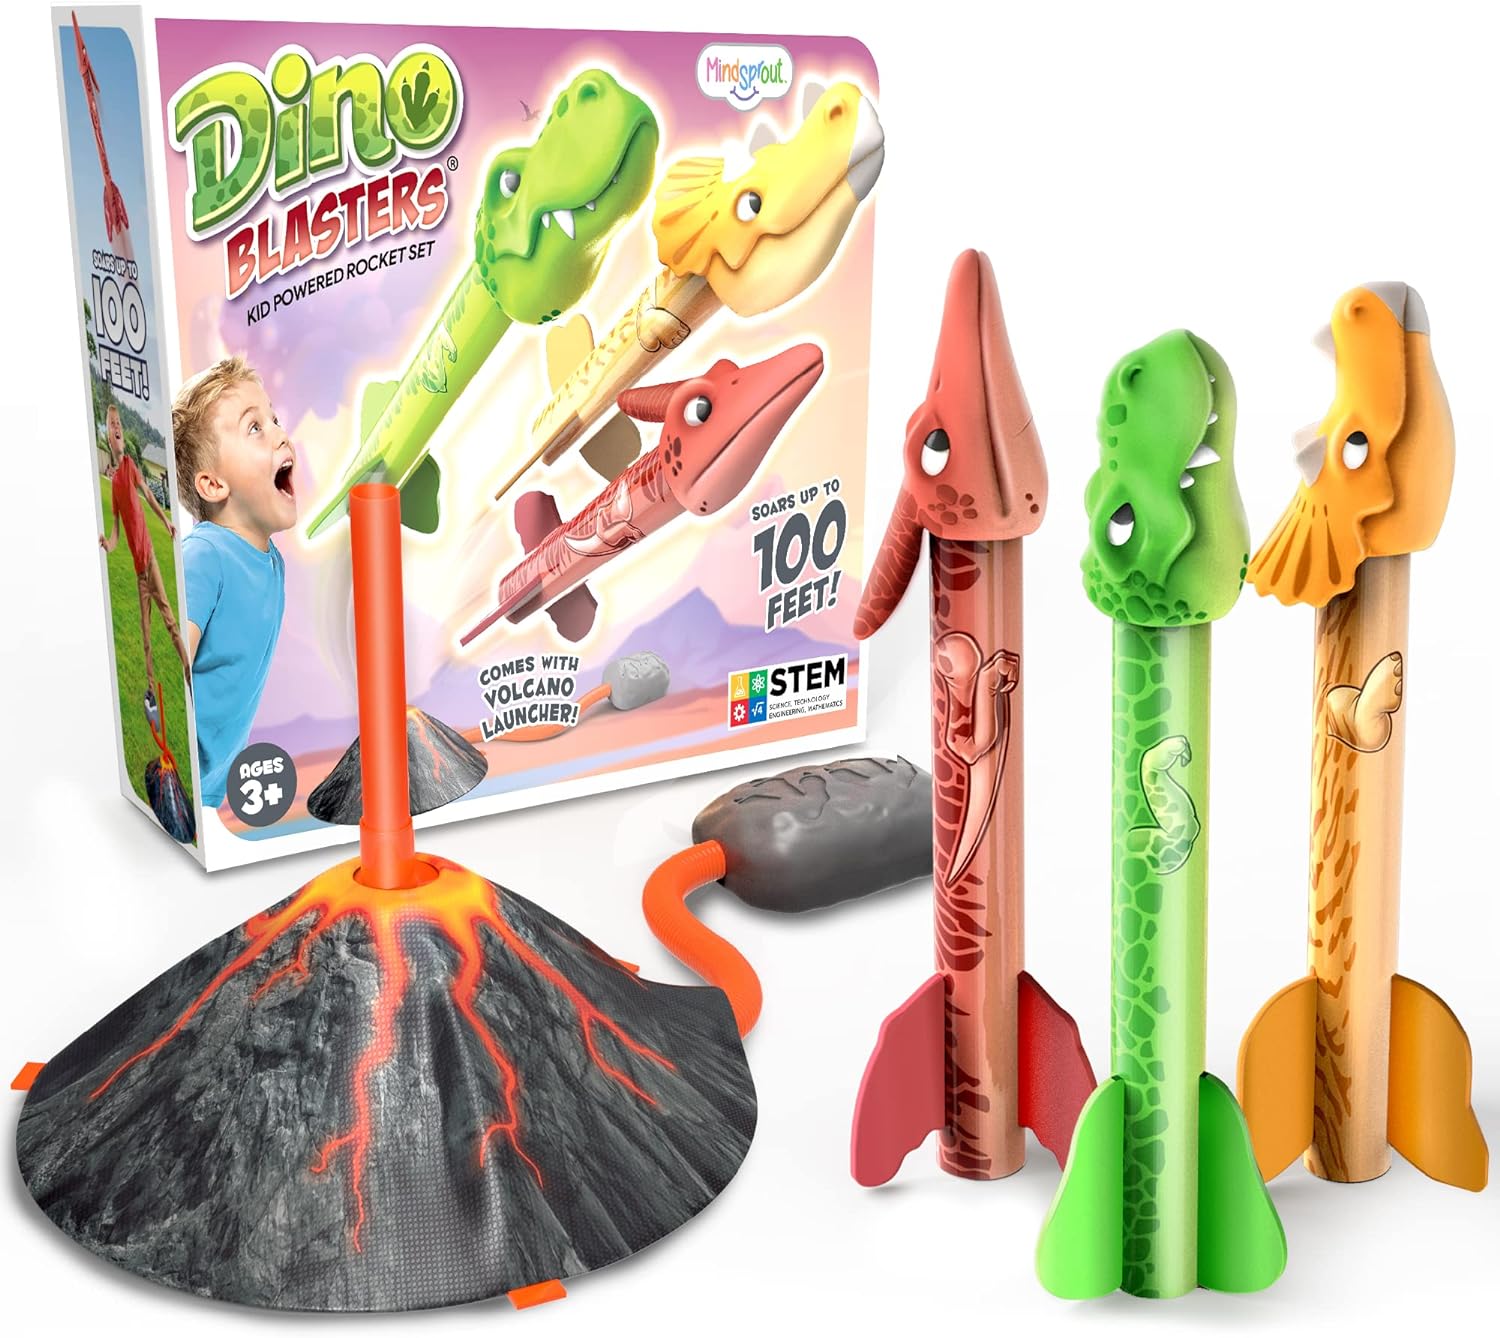 MindSprout Dino Blasters, Rocket Launcher for Kids - Launch up to 100 ft. Birthday Gift, for Boys & Girls Age 3, 4, 5, 6, 7, Years Old - Outdoor Toys, Family Fun, Dinosaur Toy, Kids Toys